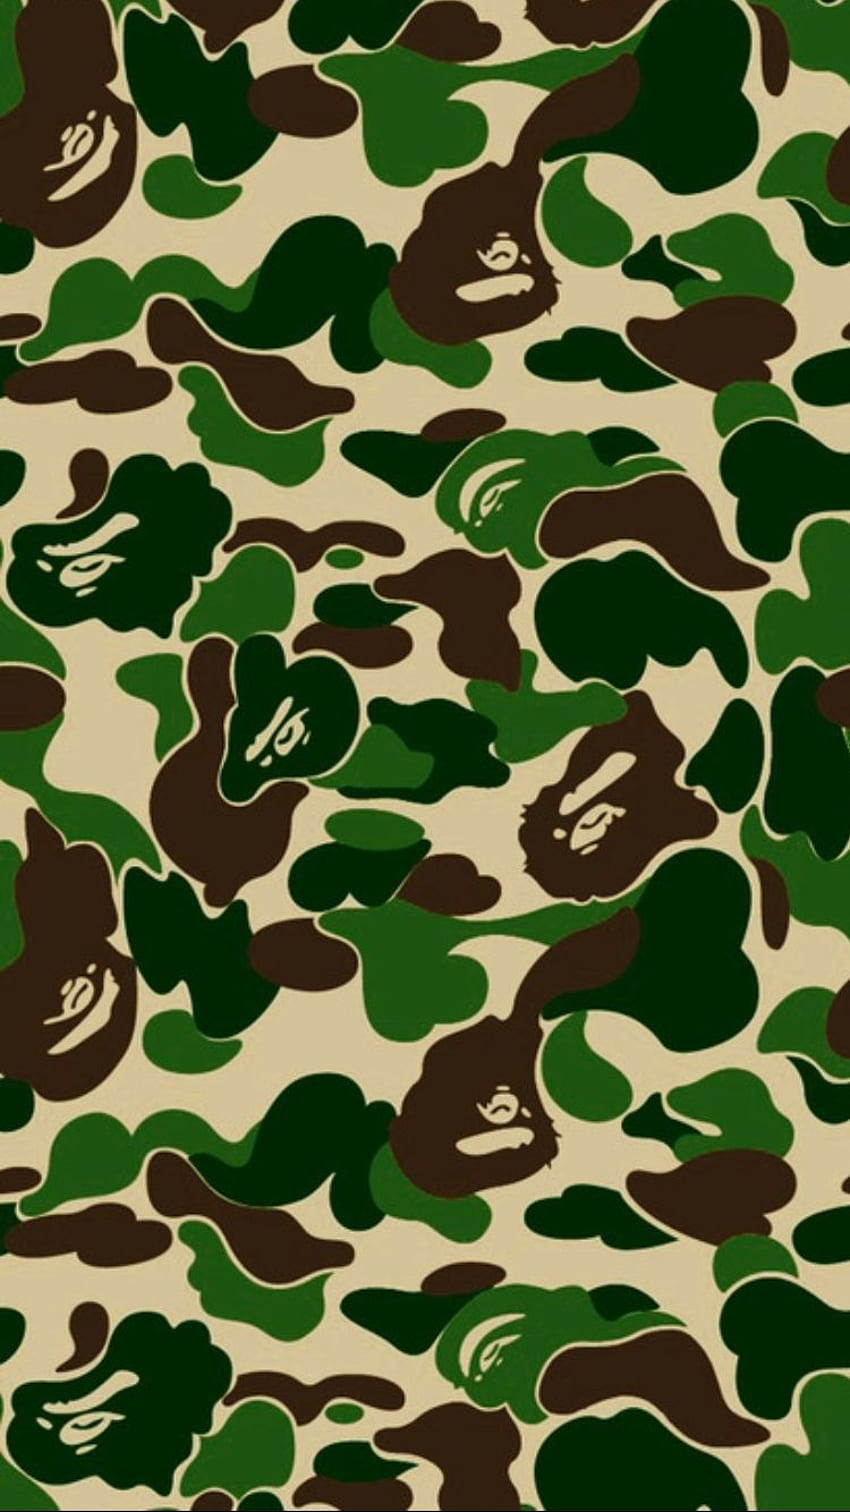 BAPE Shark Logo and symbol, meaning, history, PNG, brand